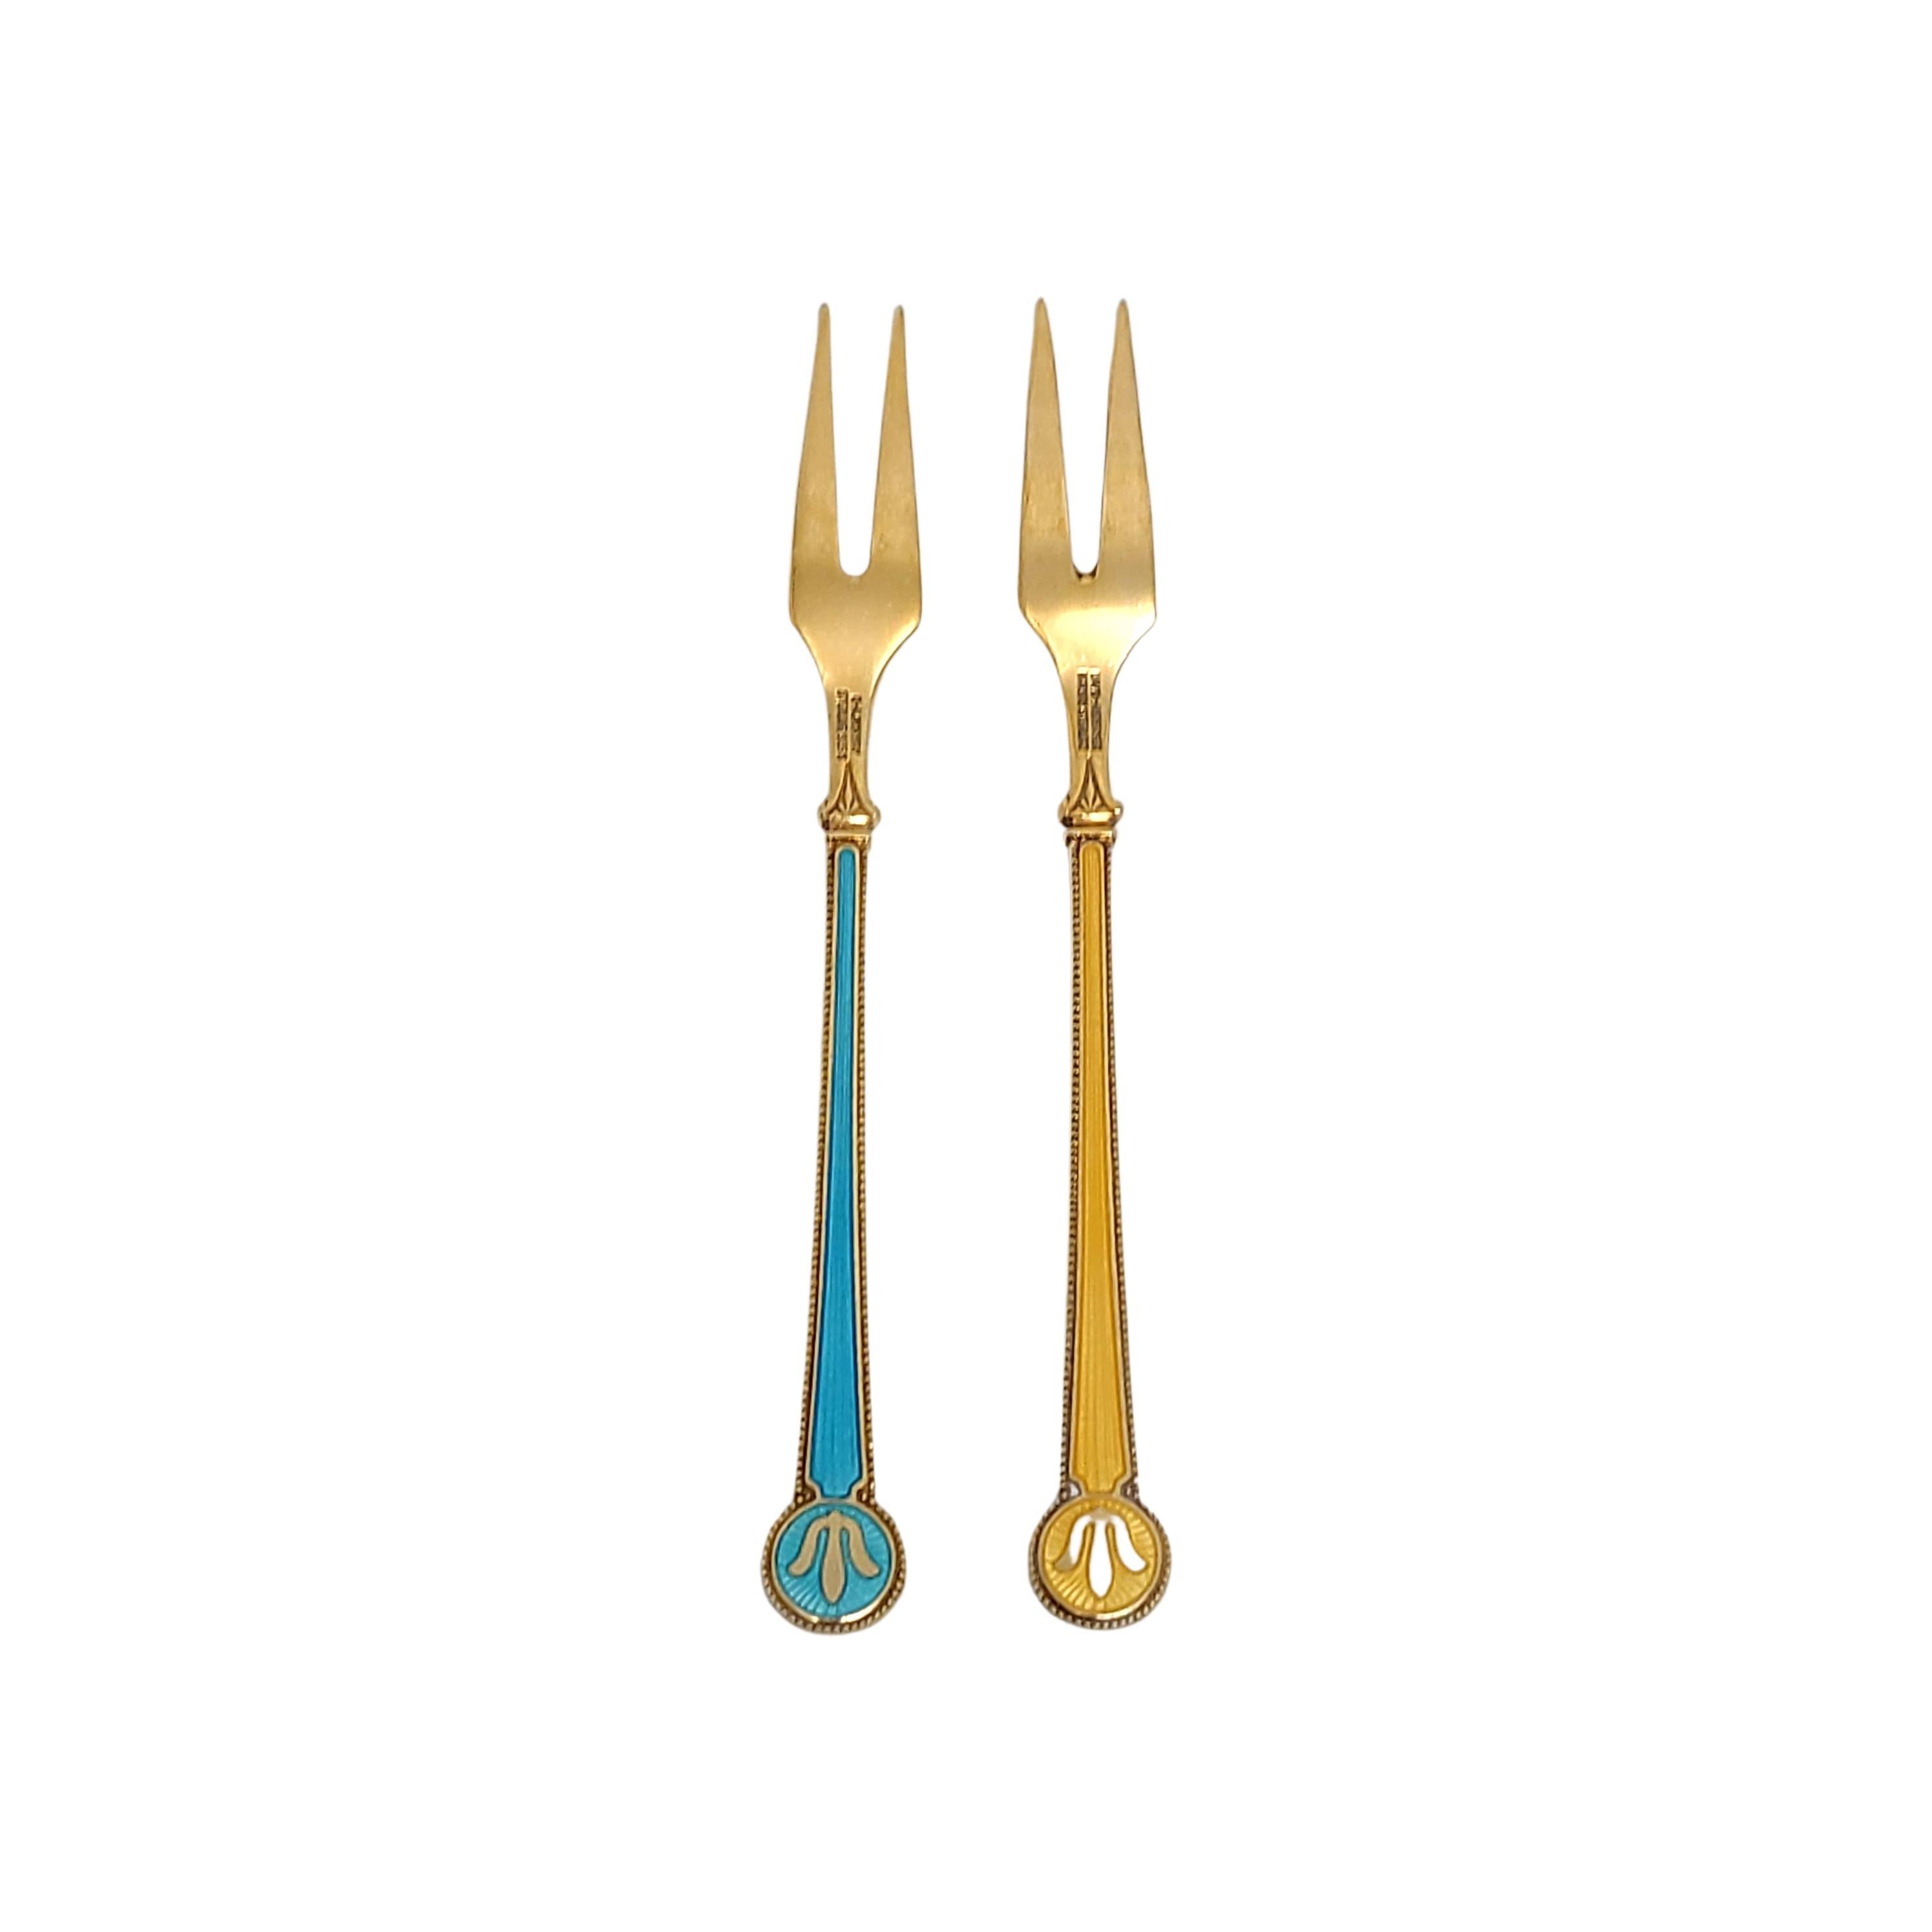 Pair of vintage gold plate over sterling silver and enamel demitasse cocktail forks, by David Andersen Denmark.

Beautifully enameled forks in yellow and light blue. Both sides of the handles are enameled, featuring a gold plate beaded edge and a